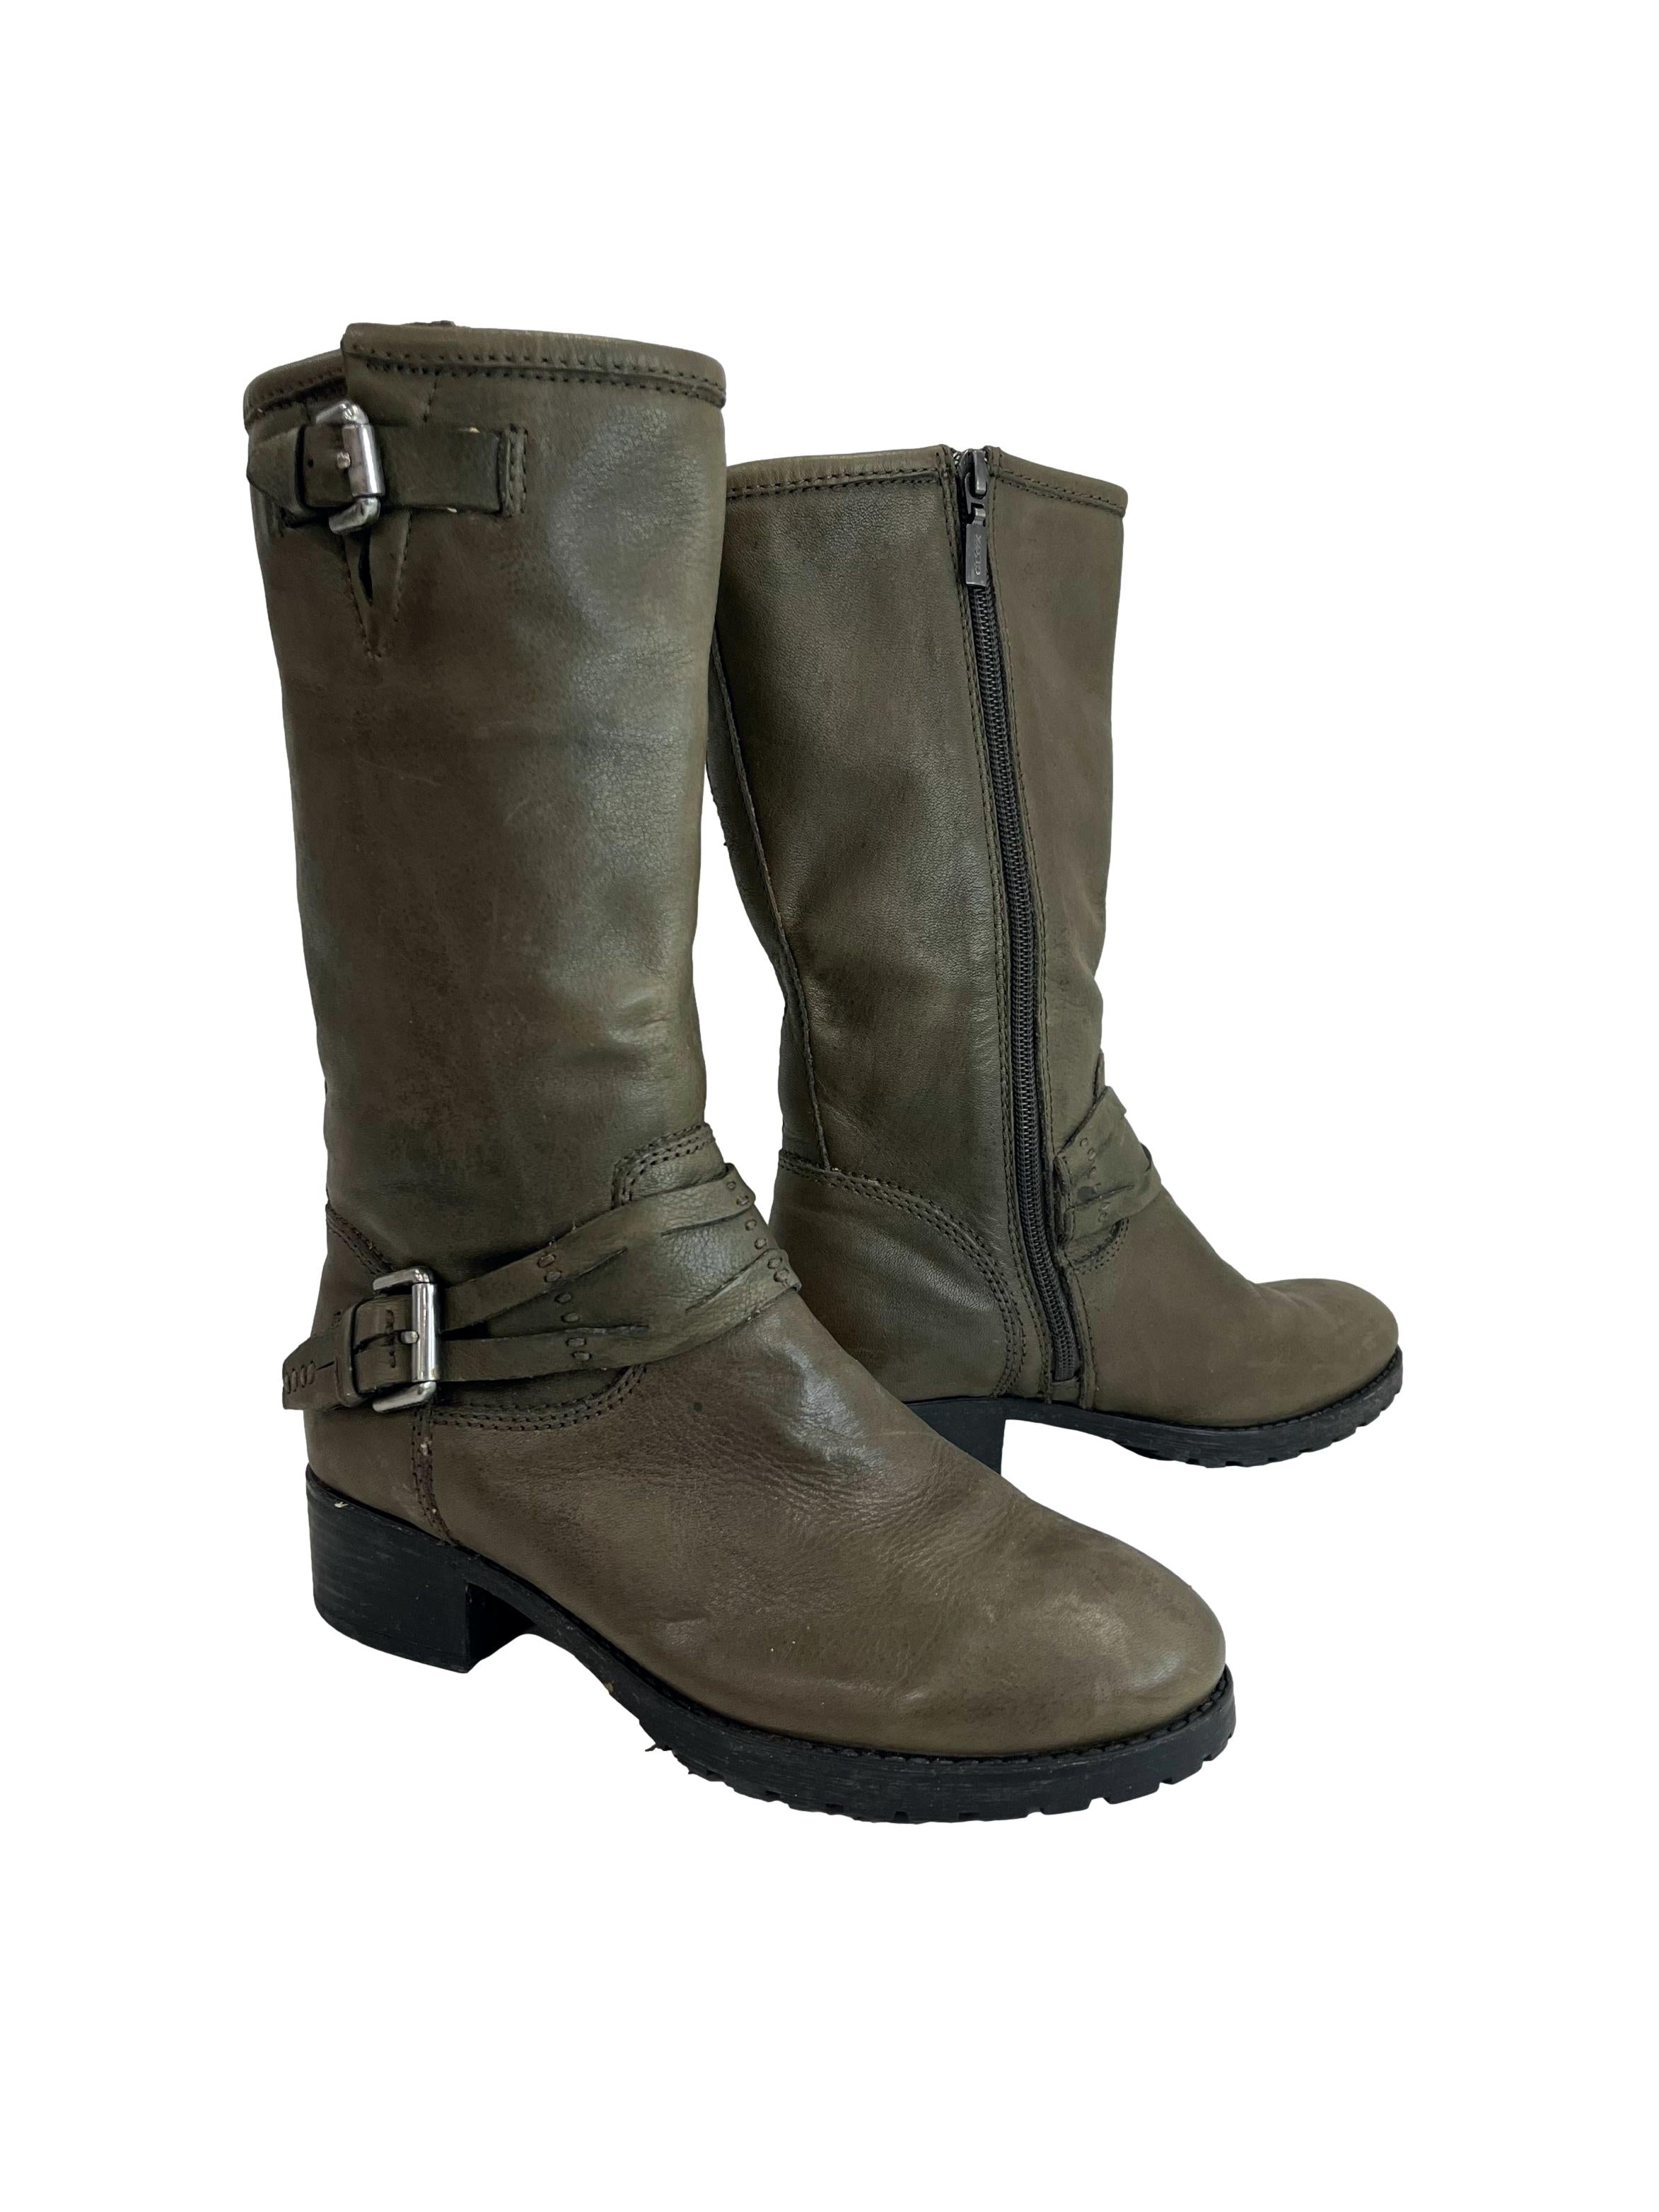 Olive Green High Heeled Boots